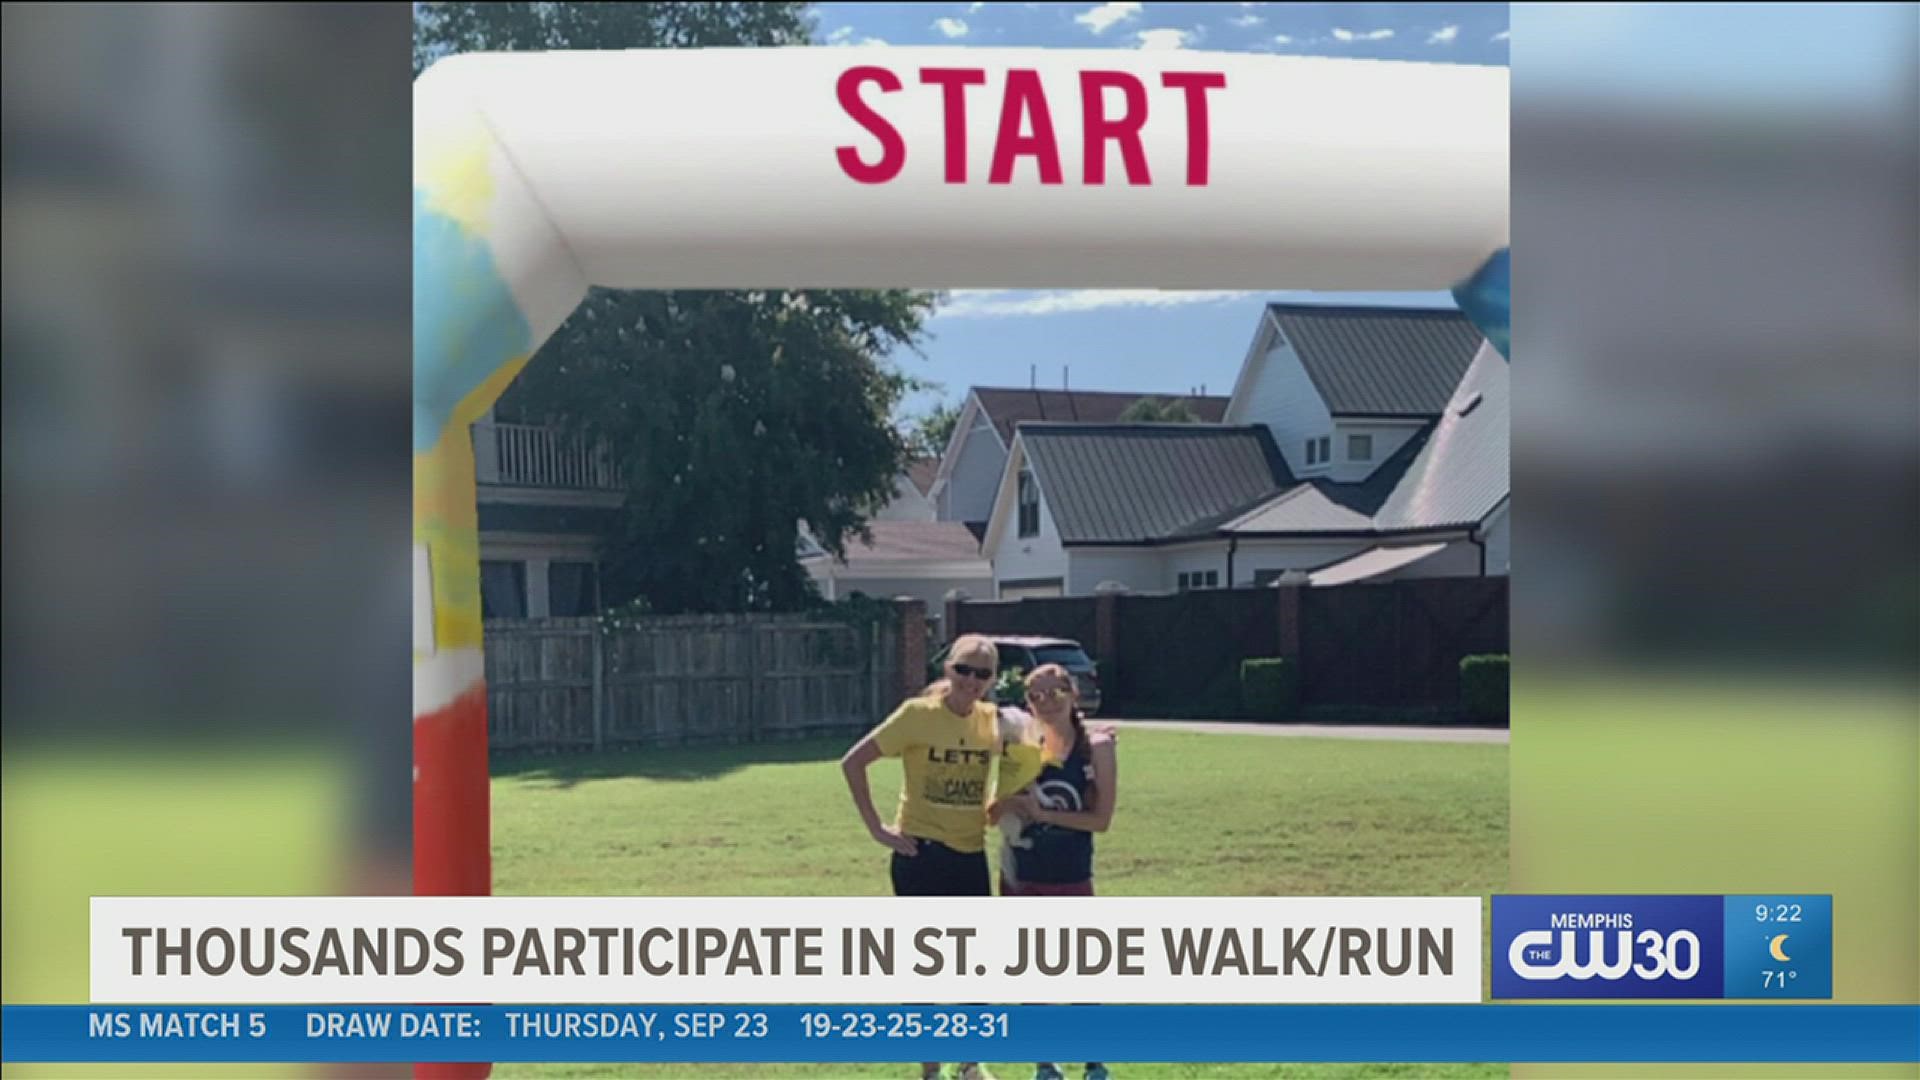 The St. Jude Walk/Run 5K had 36,000 people walking and raising money as a part of Childhood Cancer Awareness Month.